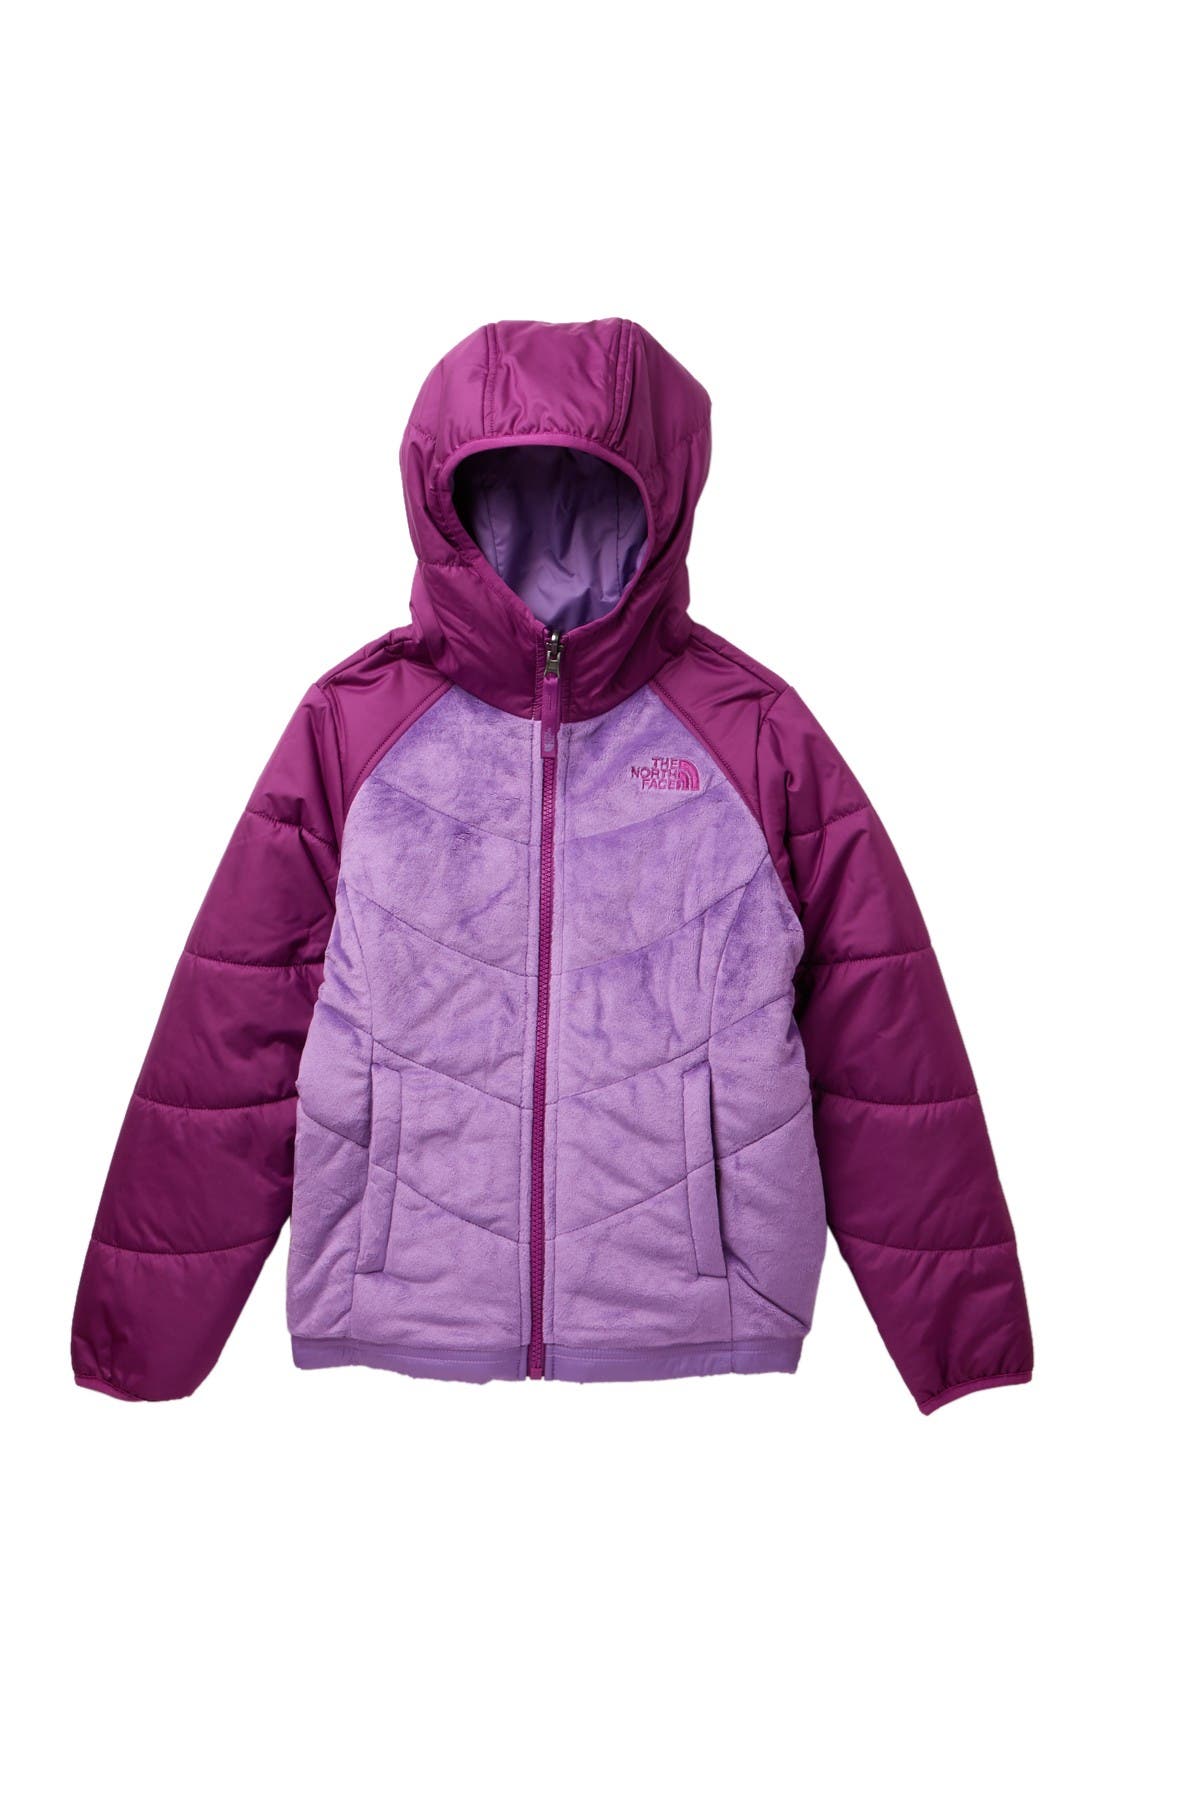 The North Face | Reversible Perseus 